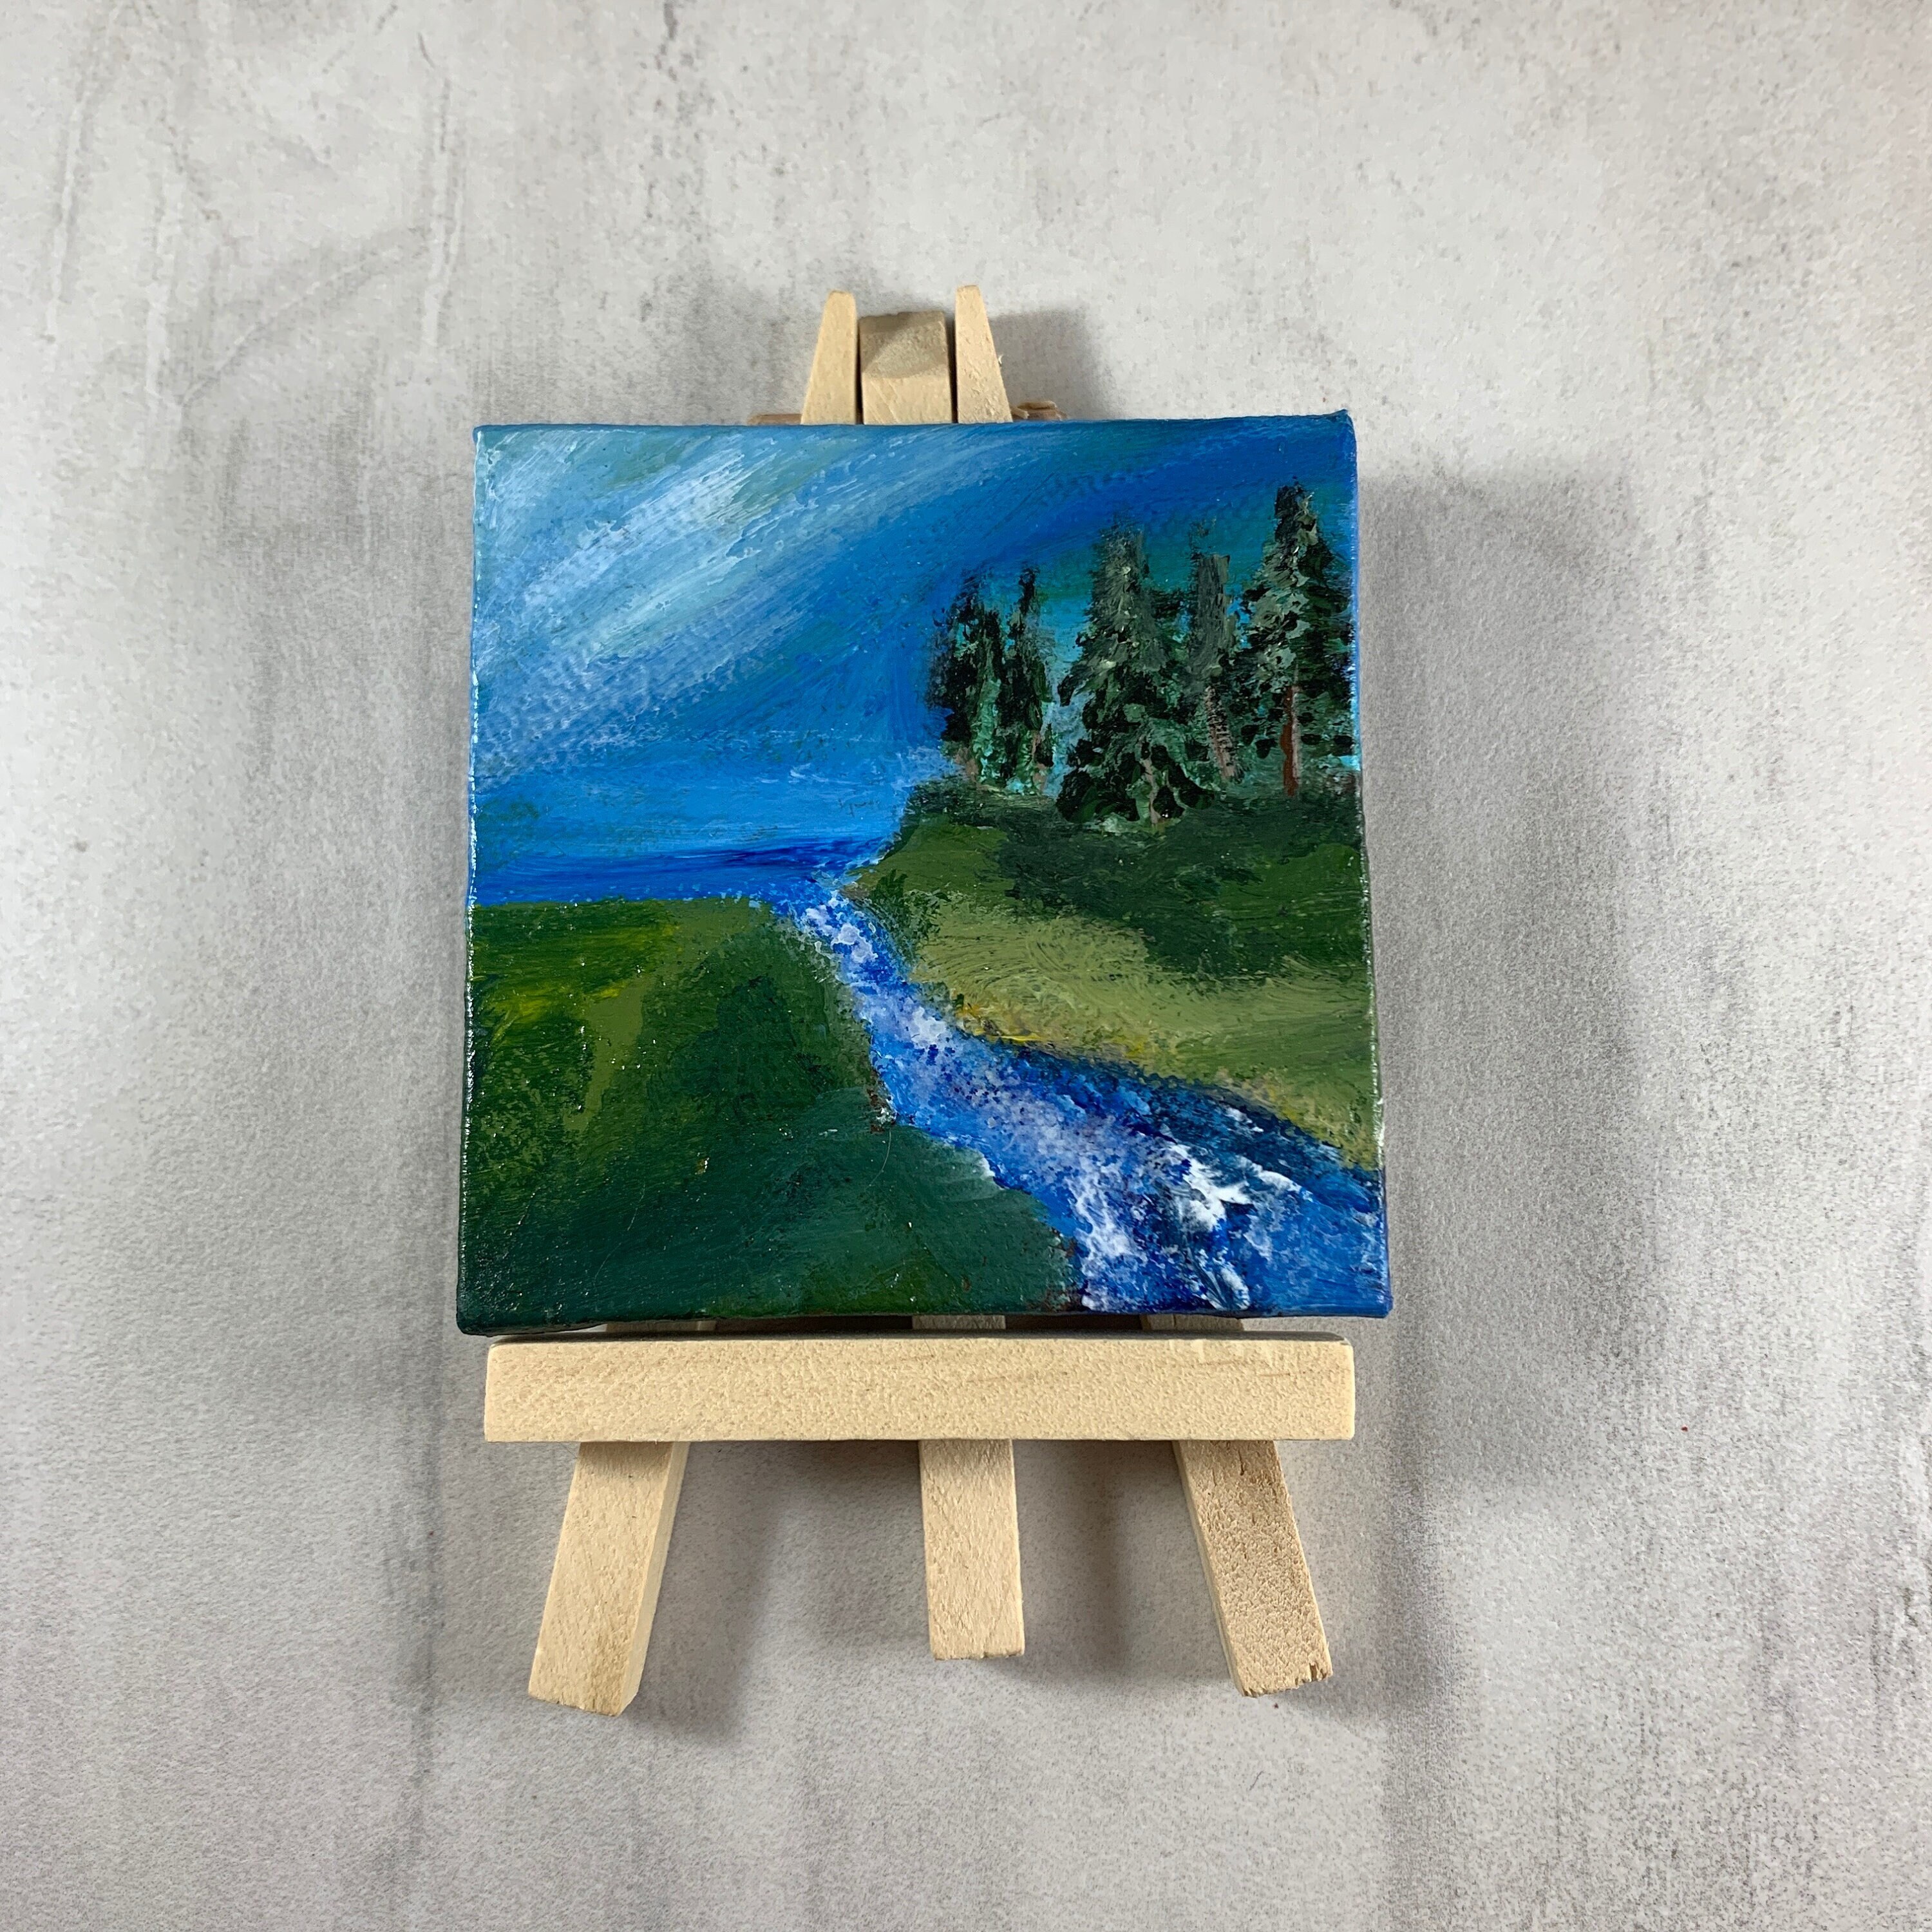 Mini Canvas Painting With Easel 3x3 Square Landscape Painting Windy Scene  Tabletop Shelf Art Home Decor Small Unisex Gift 